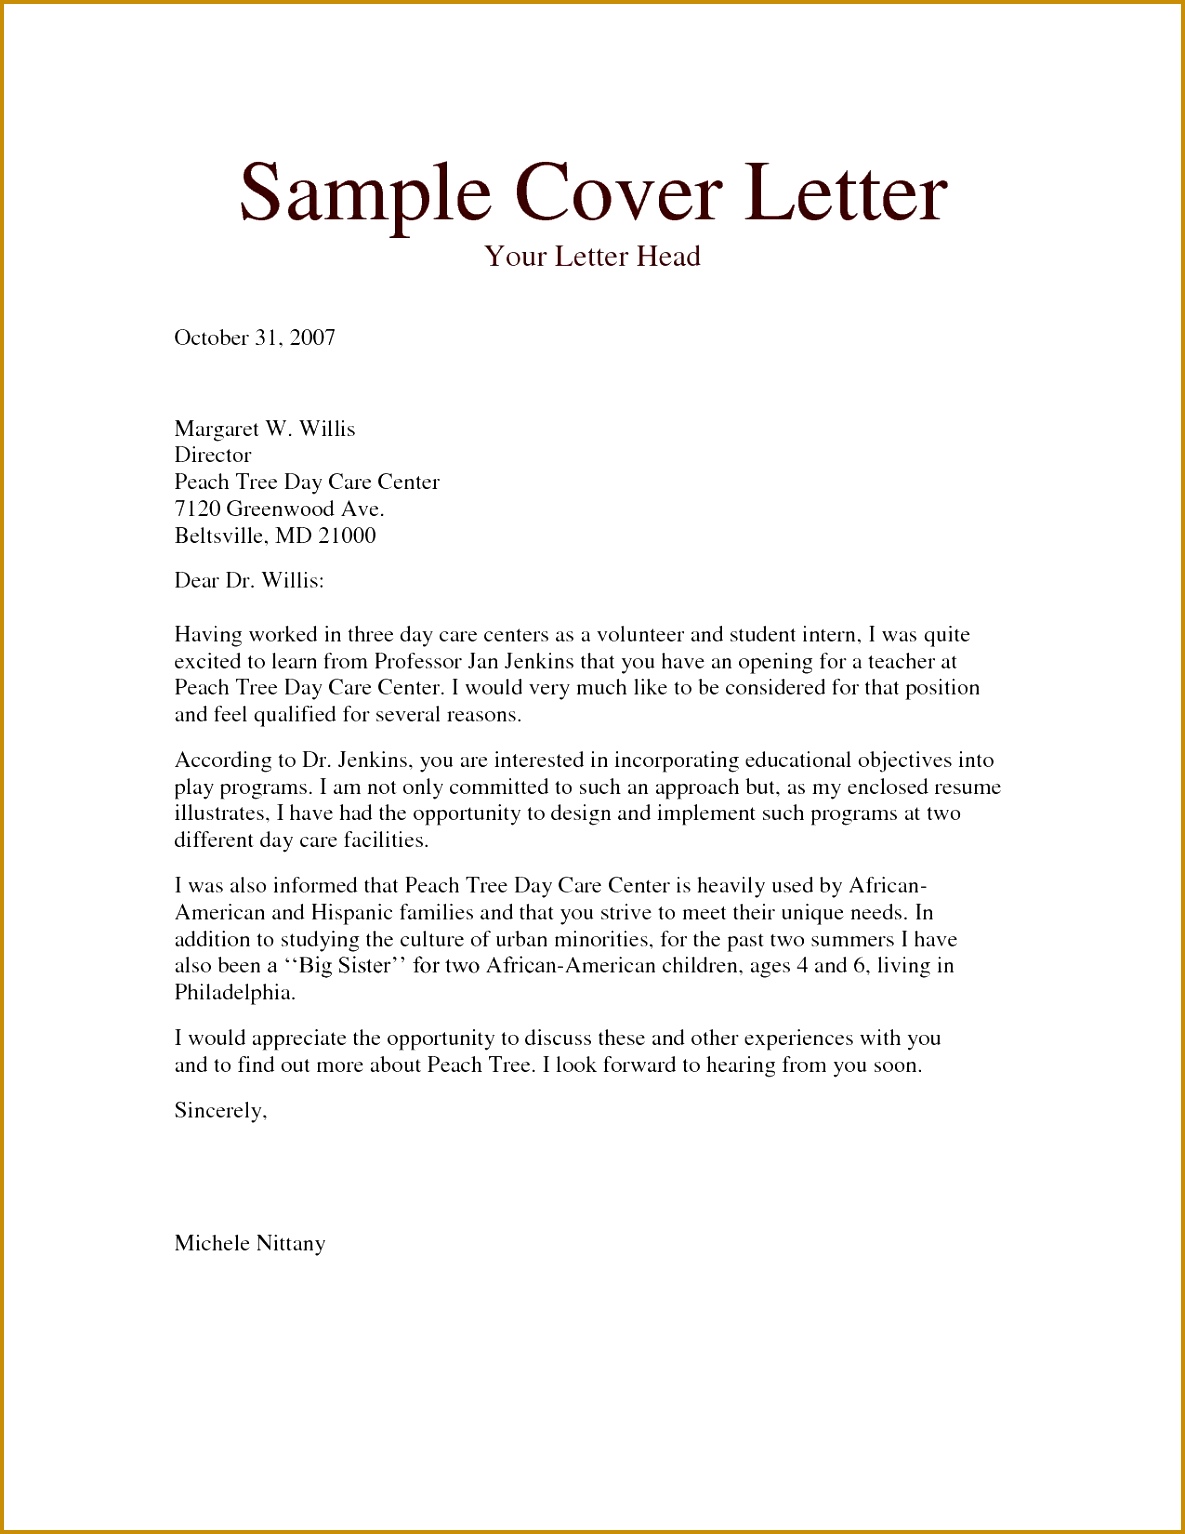 What is the Purpose Of A Cover Letter 99821 Awesome Cover Letter for Doctors Beautiful How Do You Do A Cover 15341185